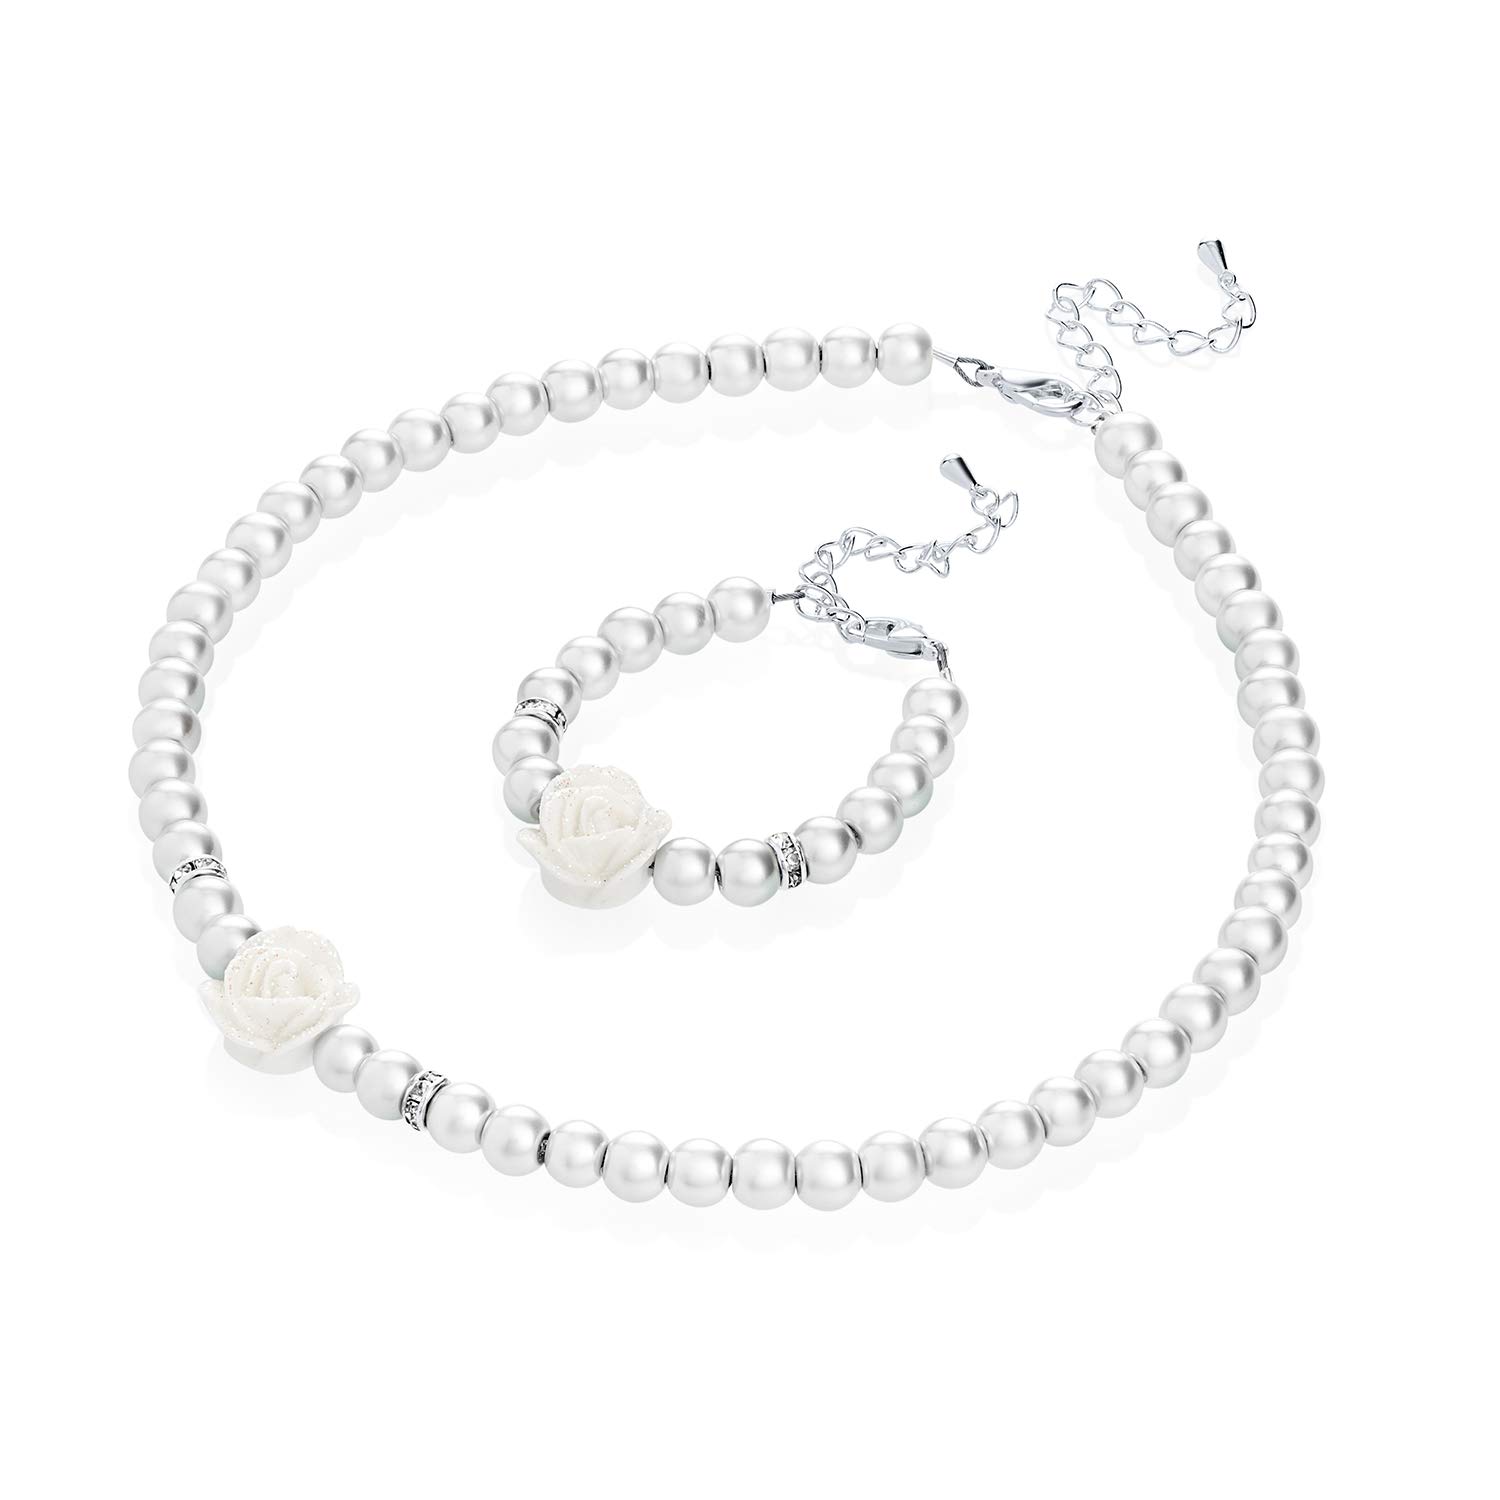 Crystal Dream Flower Girl White Simulated Pearls Flower Necklace with Bracelet Toddler Gift Set (GSTNB2-W)